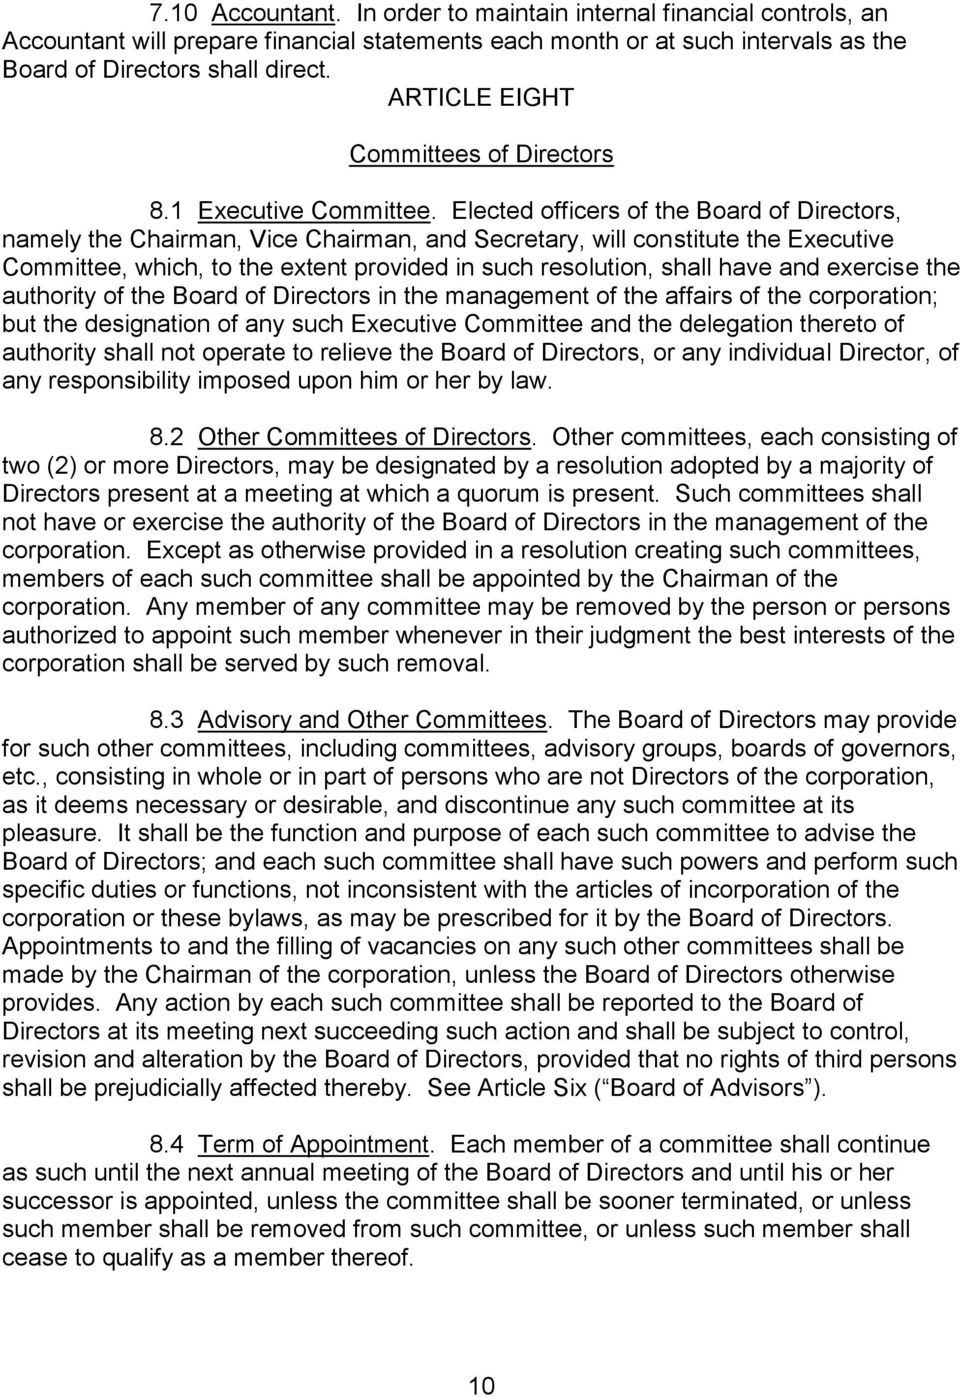 Elected officers of the Board of Directors, namely the Chairman, Vice Chairman, and Secretary, will constitute the Executive Committee, which, to the extent provided in such resolution, shall have